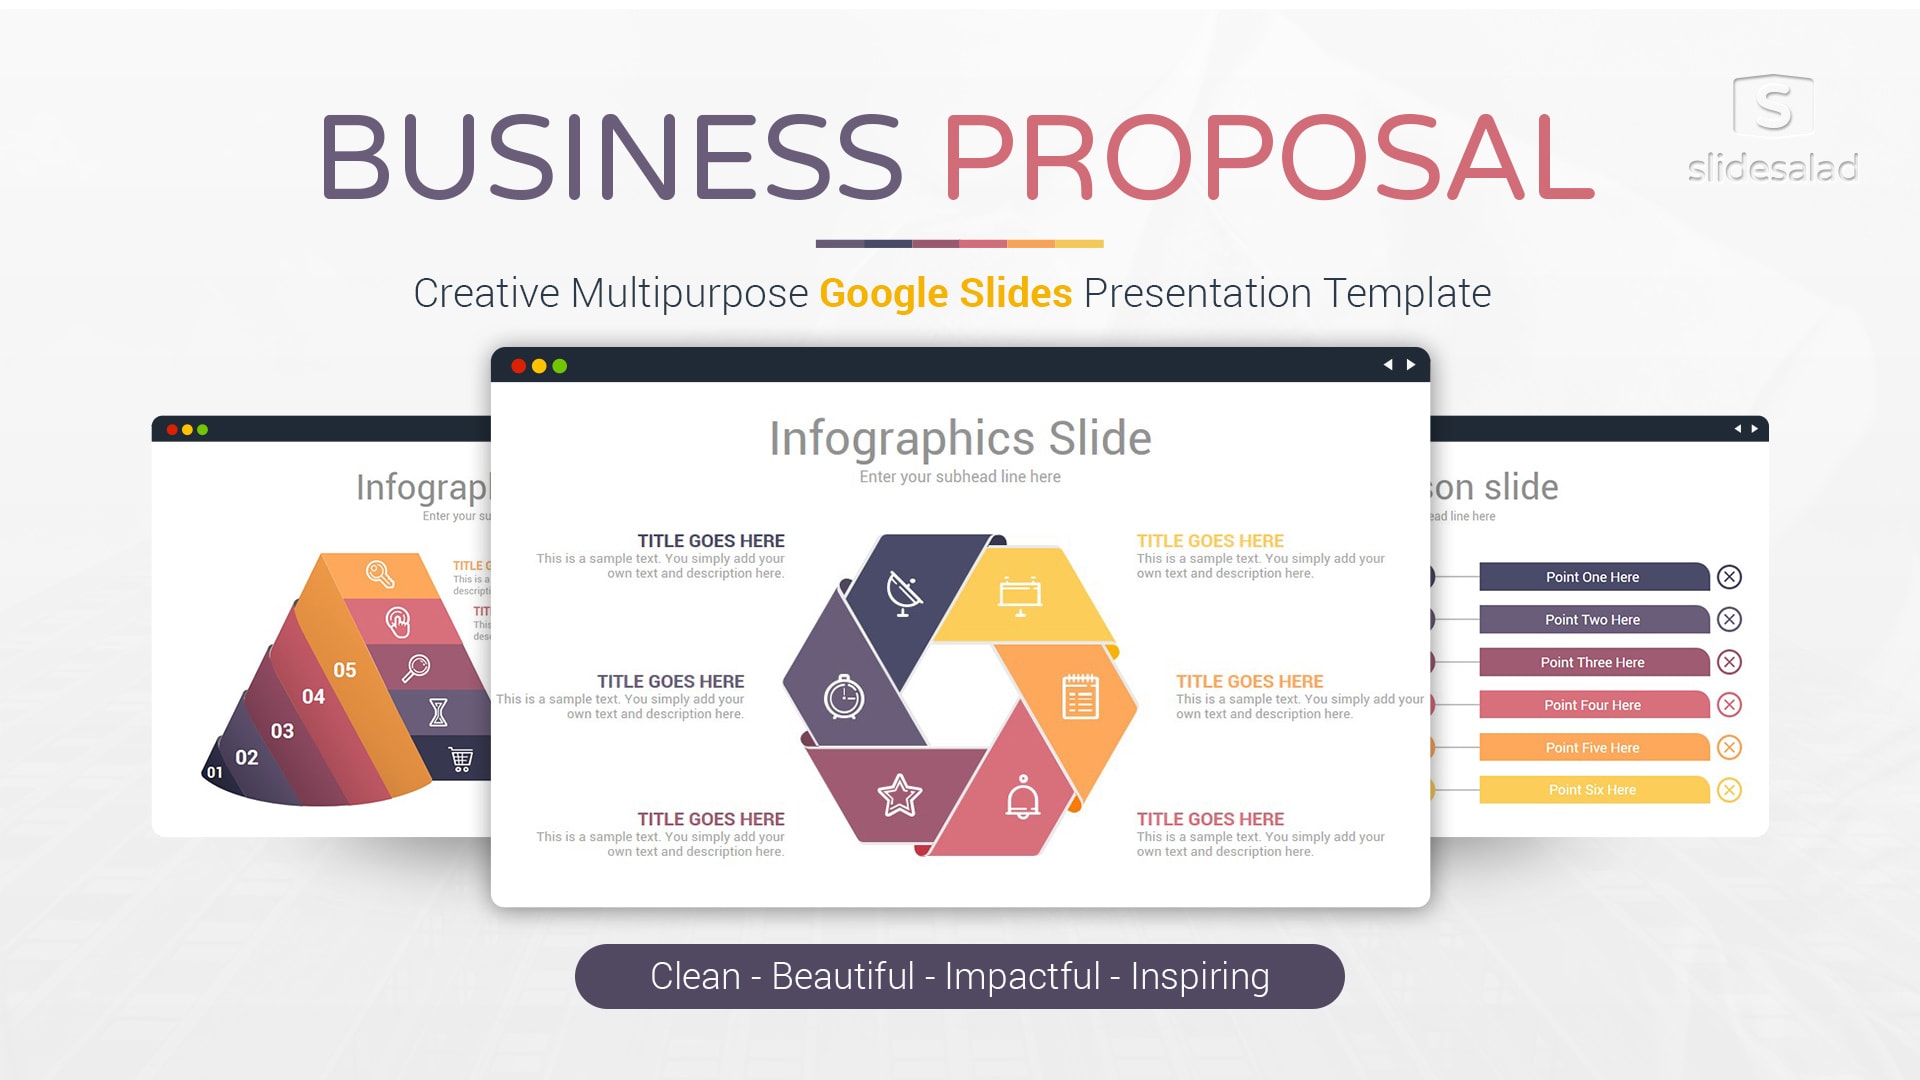 Business Proposal Google Slides Presentation Template - An All in One Business Proposal Theme for Google Slides